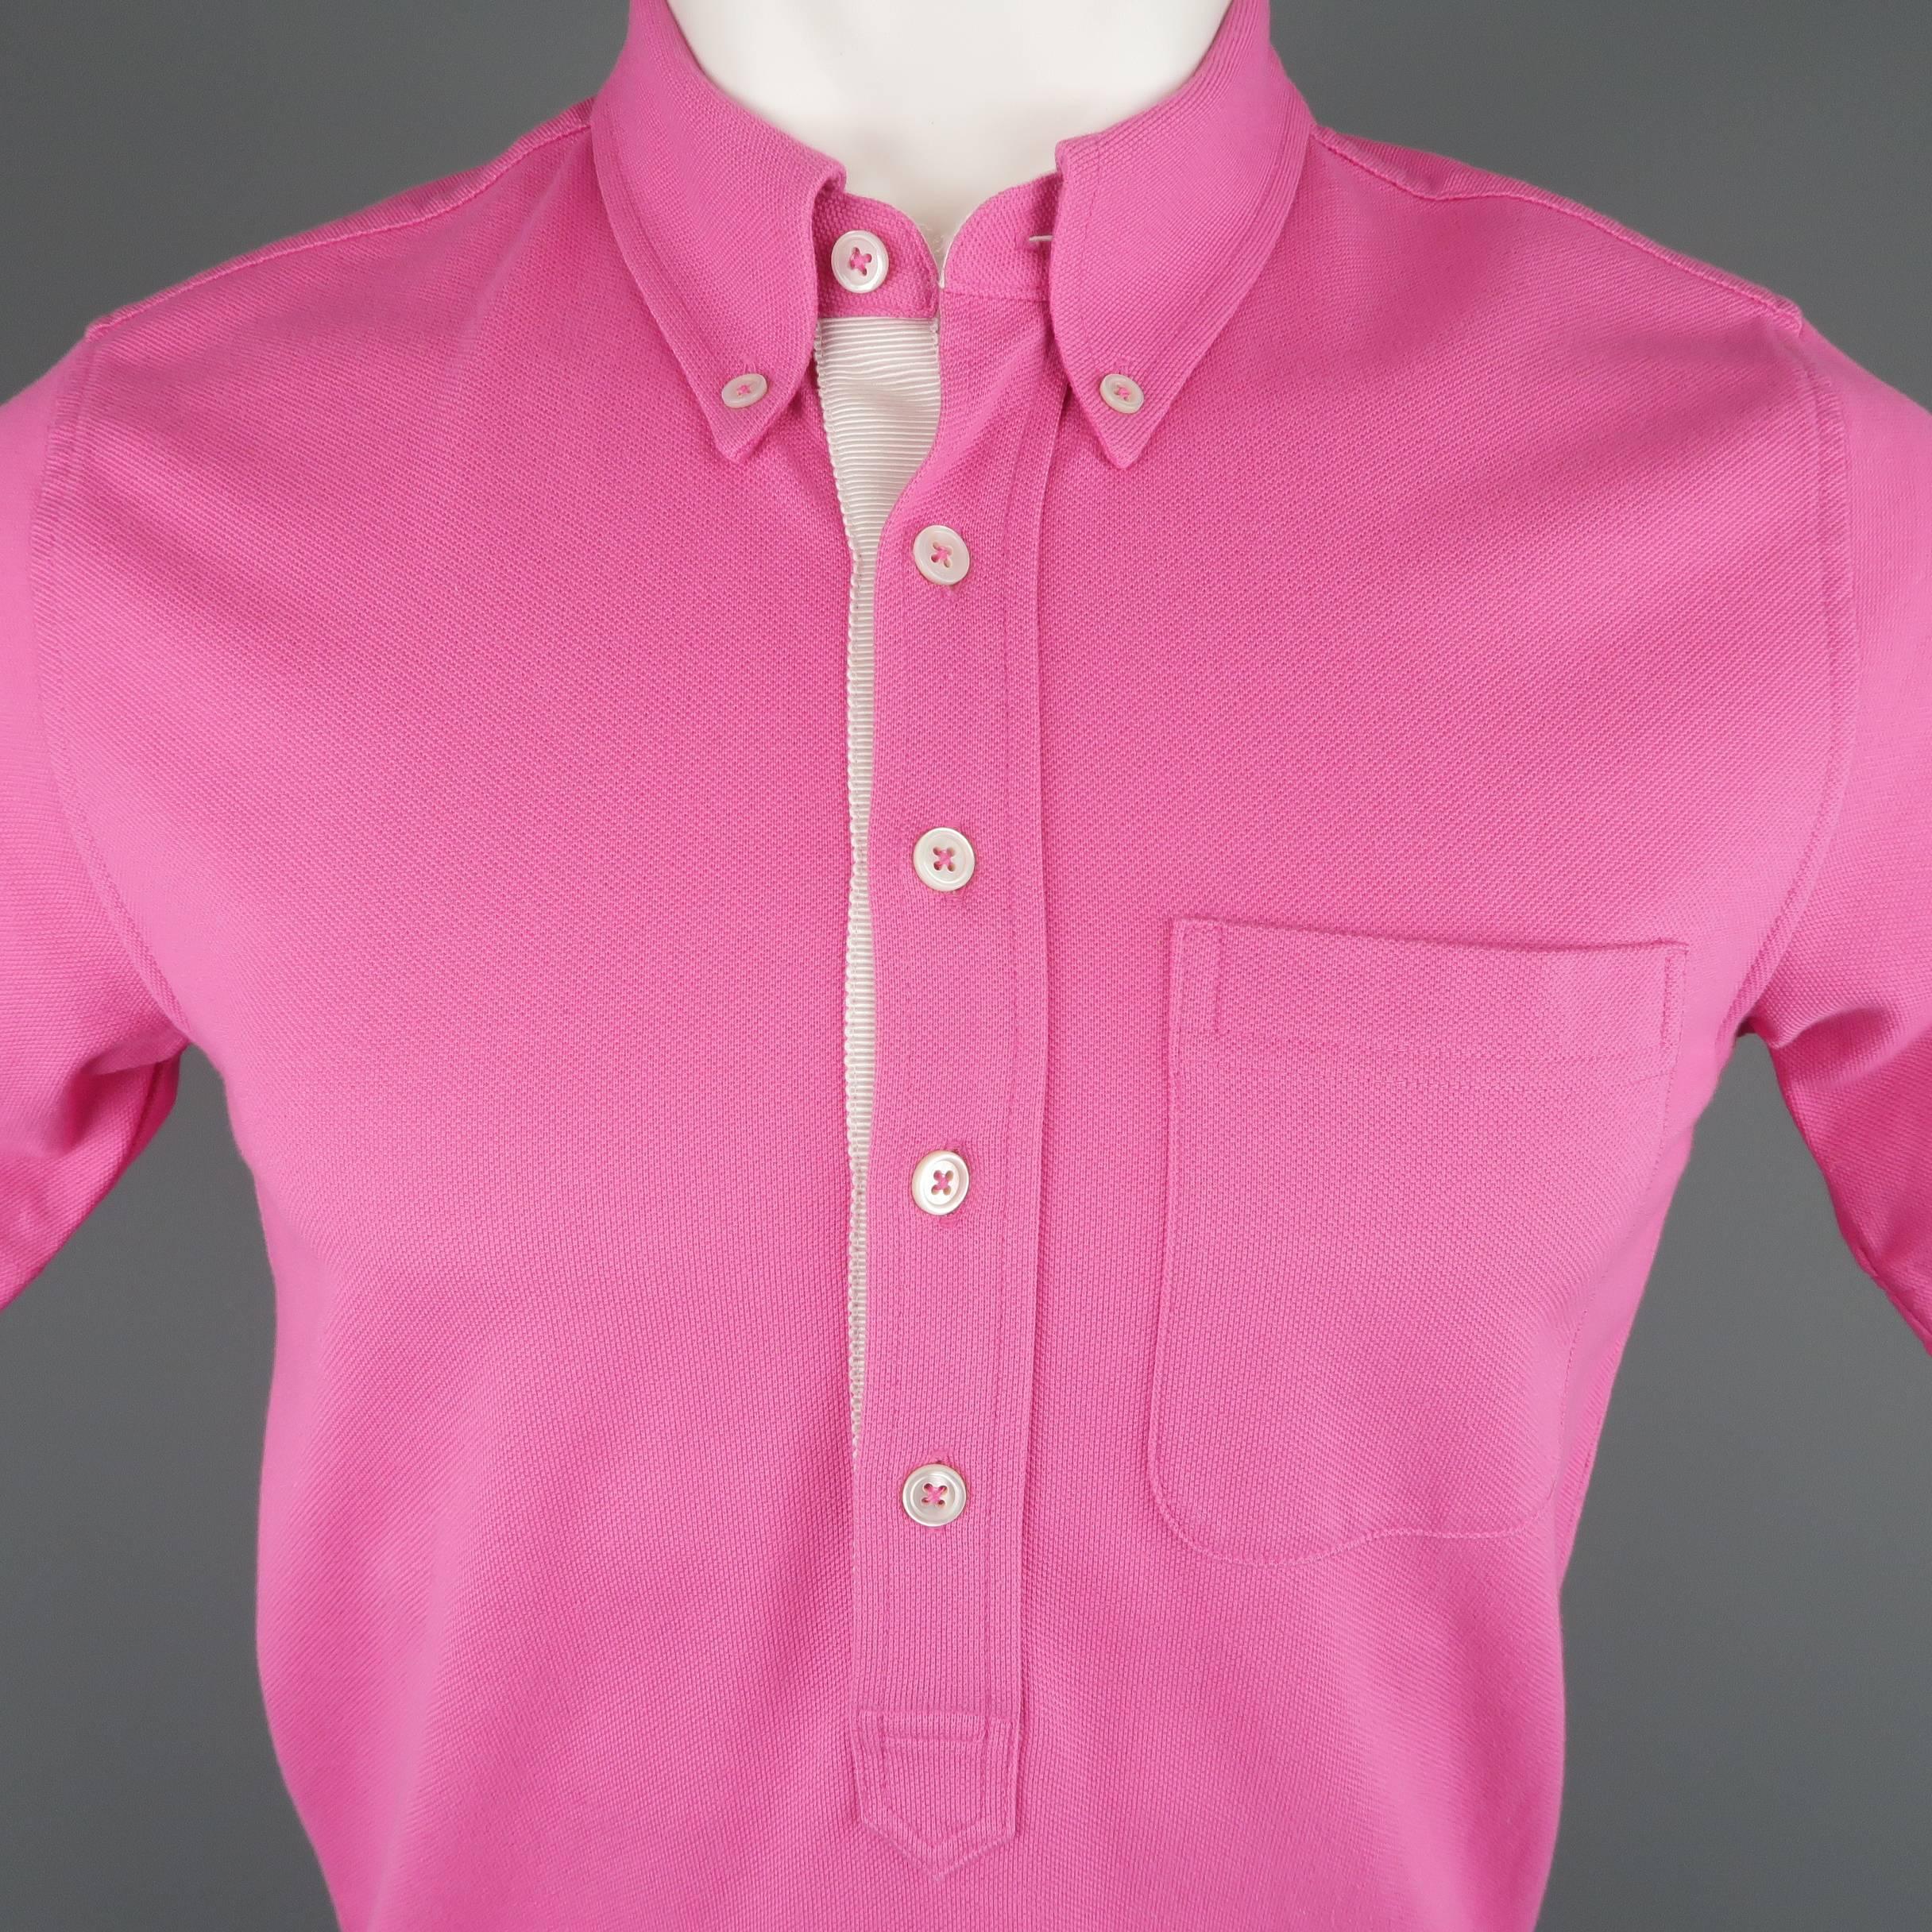 BLACK FLEECE  polo comes in dark pink cotton pique with a pointed button down collar cream ribbon trim, and patch pocket.
 
Excellent Pre-Owned Condition.
Marked: BB1
 
Measurements:
 
Shoulder: 15 in.
Chest: 36 in.
Sleeve: 9 in.
Length: 26 in.
